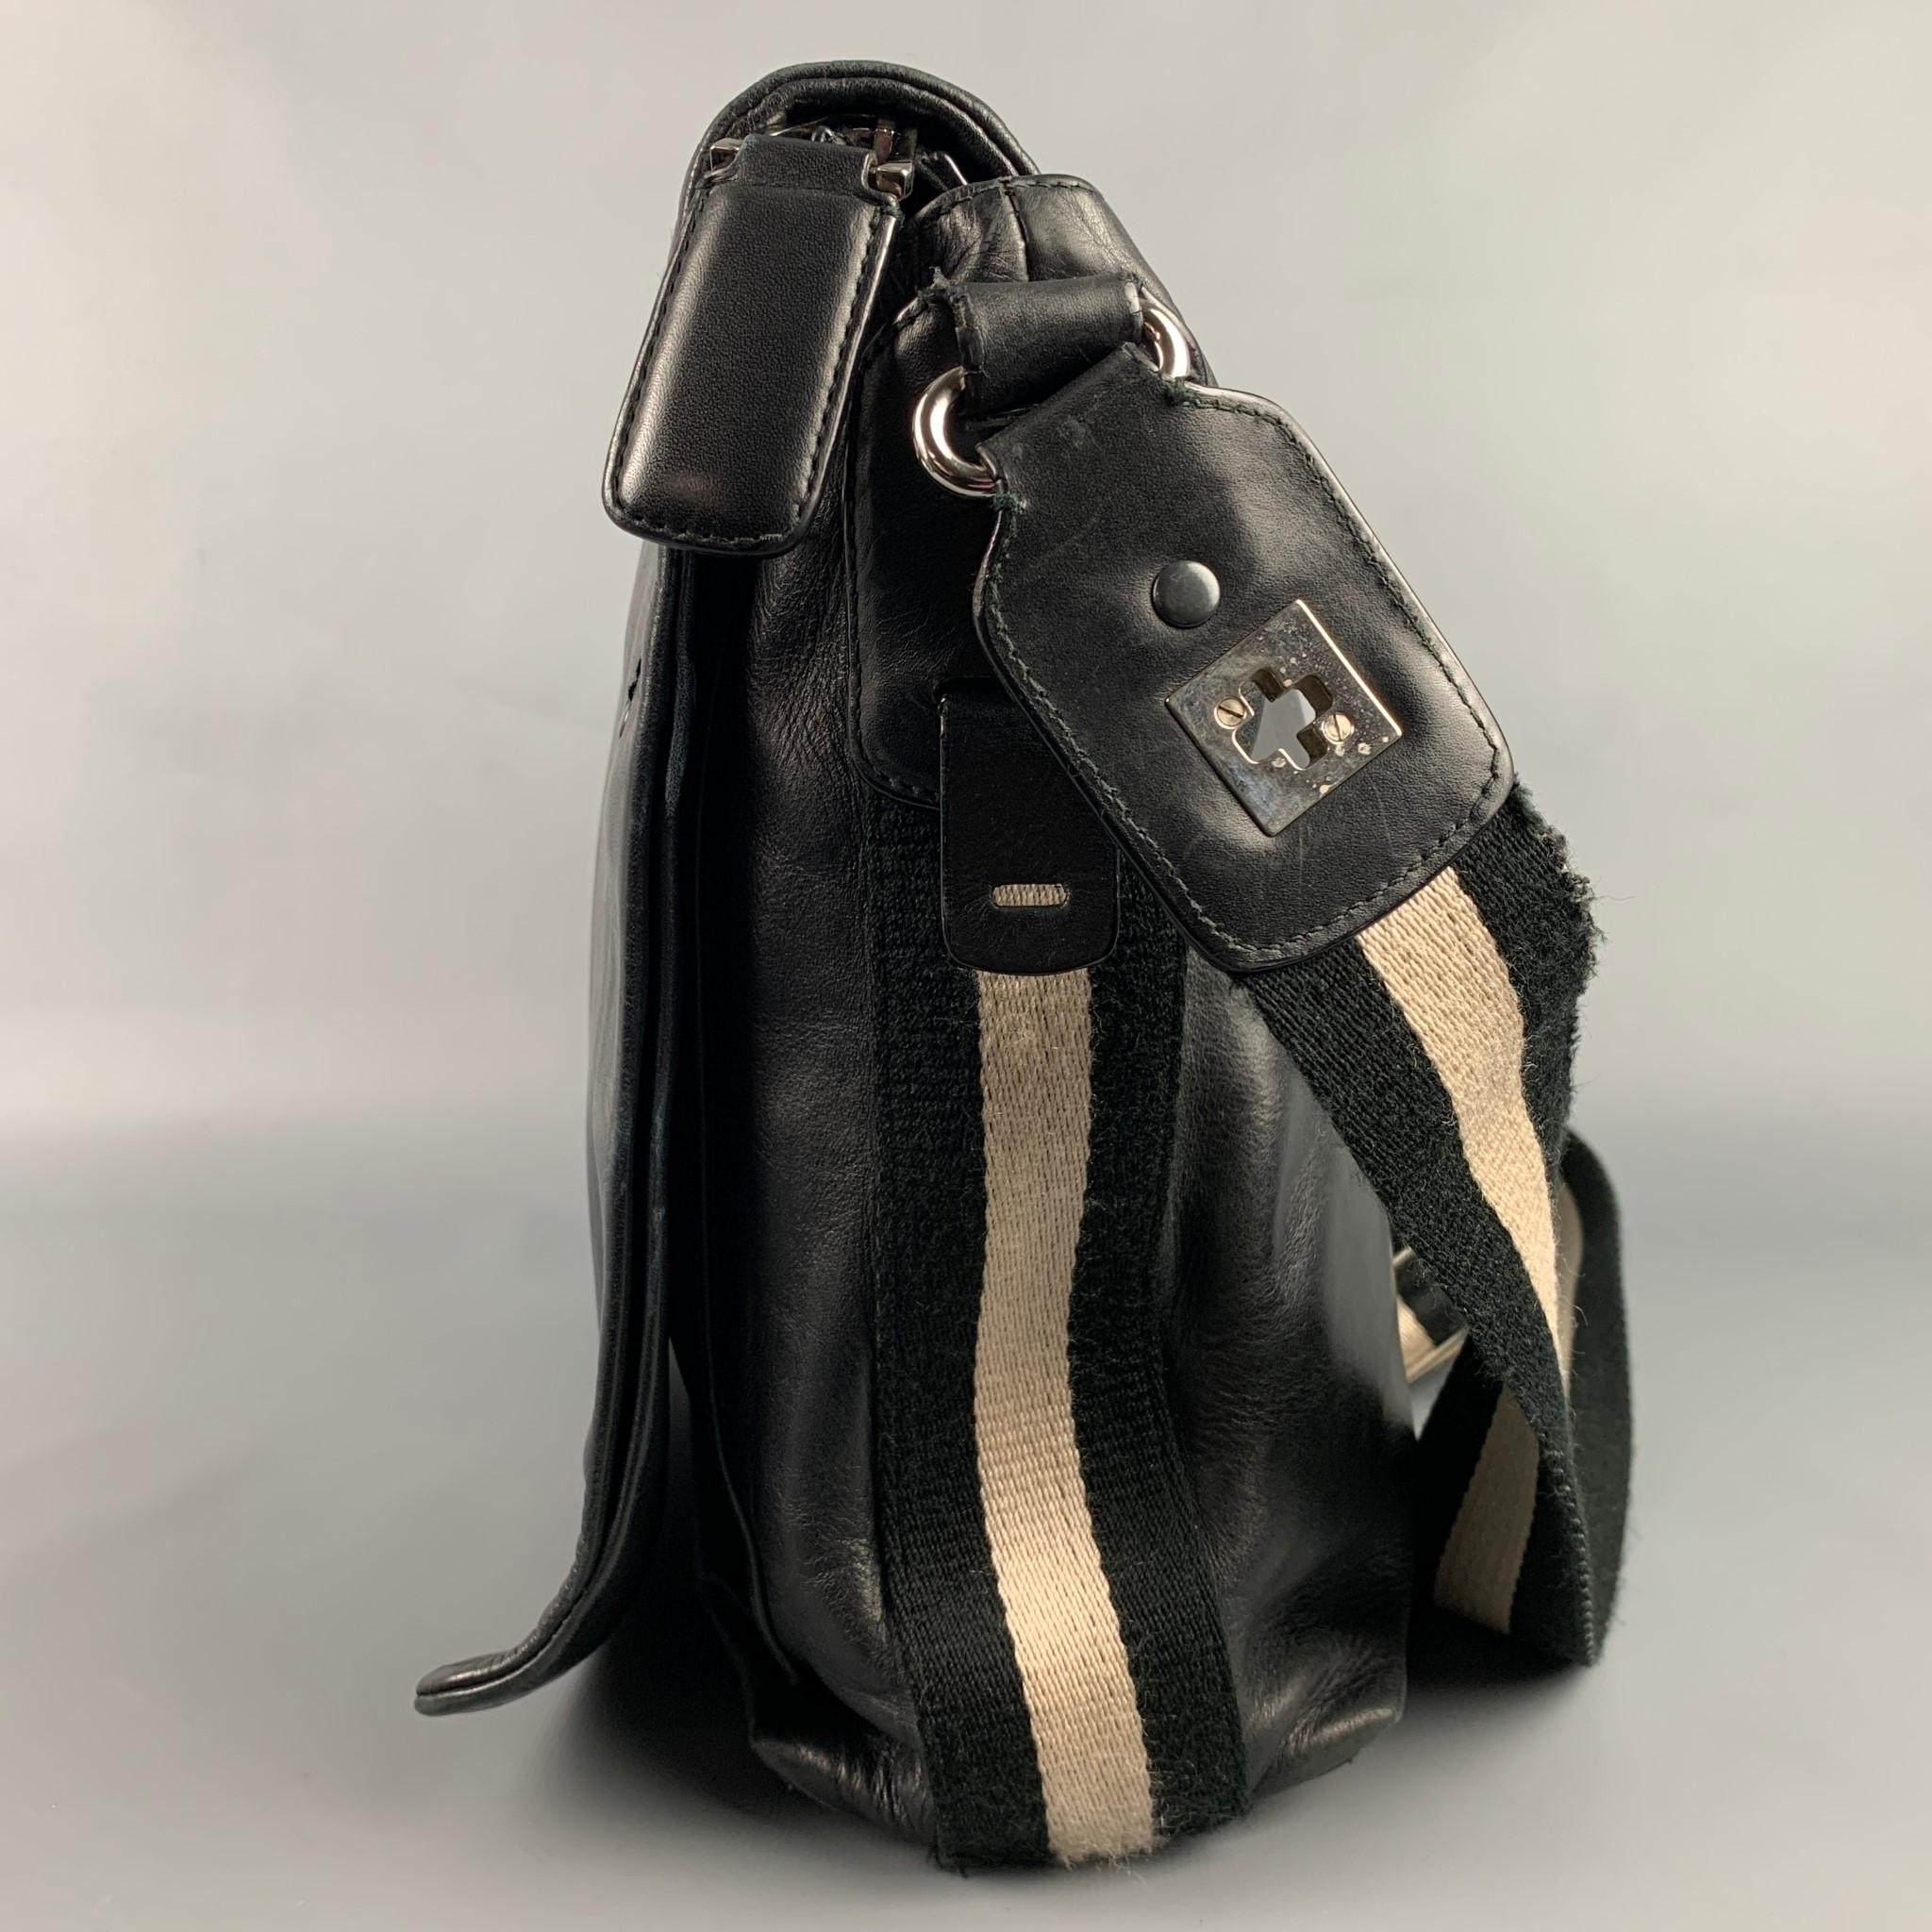 BALLY bag comes in a black leather featuring a messenger style, shoulder strap, stripe trim, front flap design, silver tone hardware, inner compartments, and a zipper closure. Made in Switzerland. 

Good Pre-Owned Condition.

Measurements:

Length: